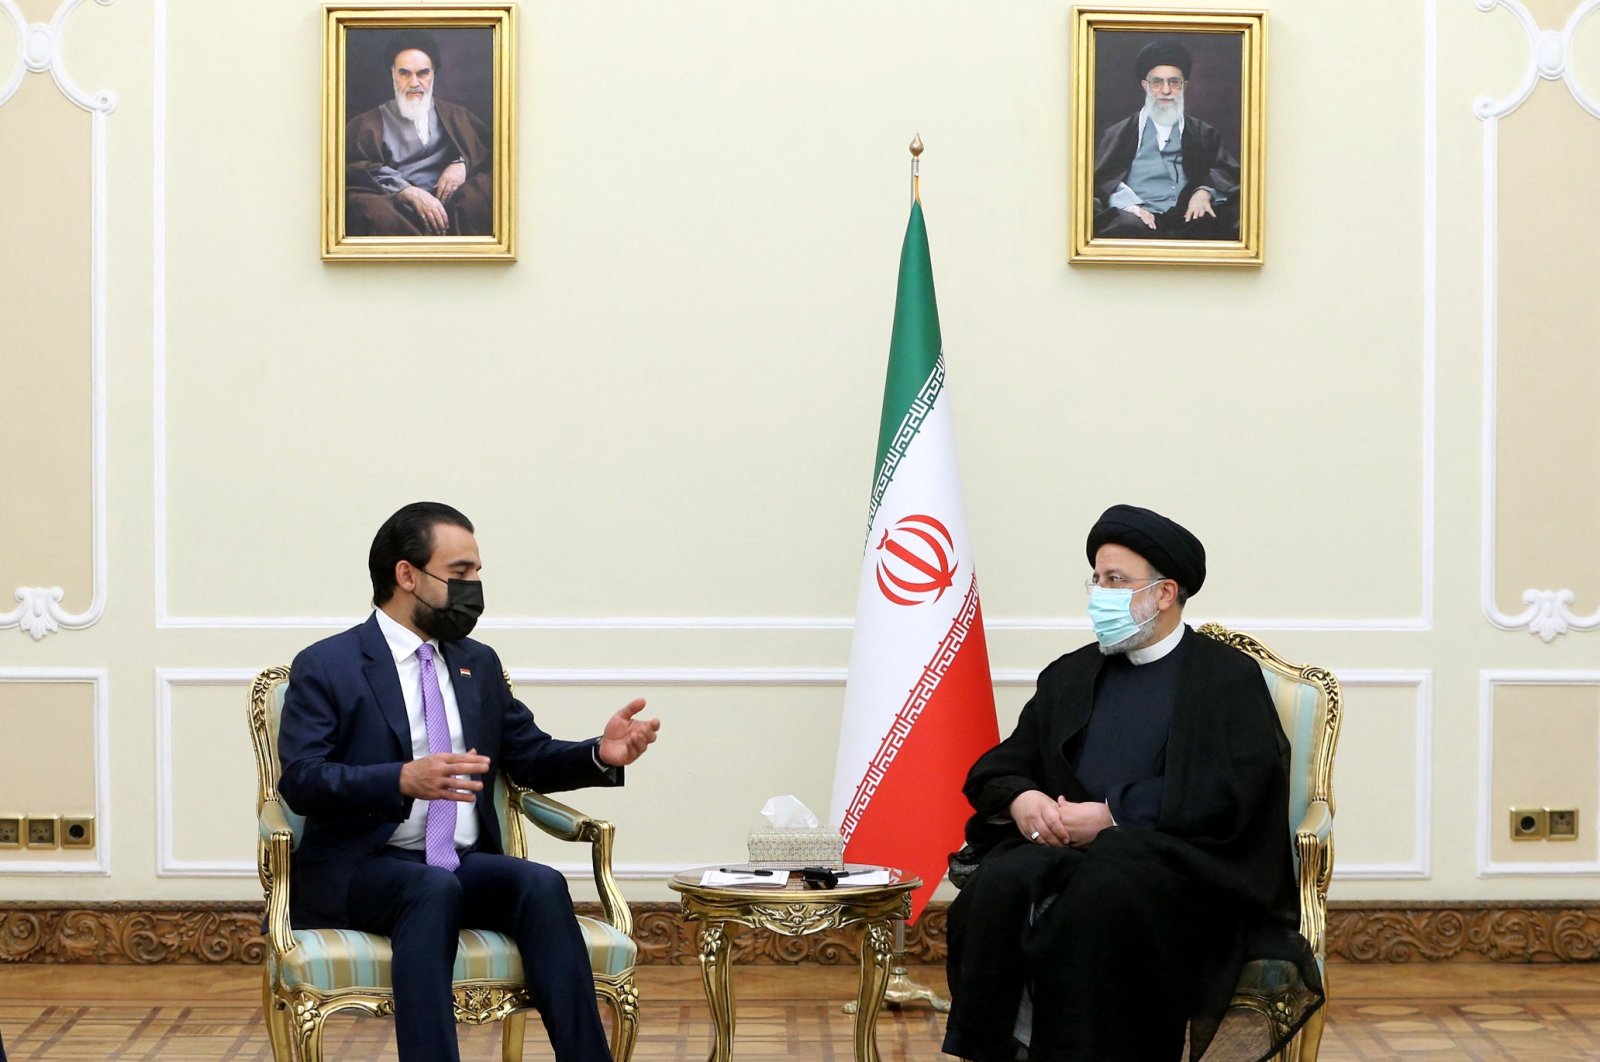 A handout picture provided by the Iranian presidency on April 27, 2022 shows President Ebrahim Raisi (R) meeting with Iraqi Speaker of the Parliament Mohammed al-Halbusi (L) in Tehran, on April 18, 2022. (Photo by HO / Iranian Presidency / AFP)